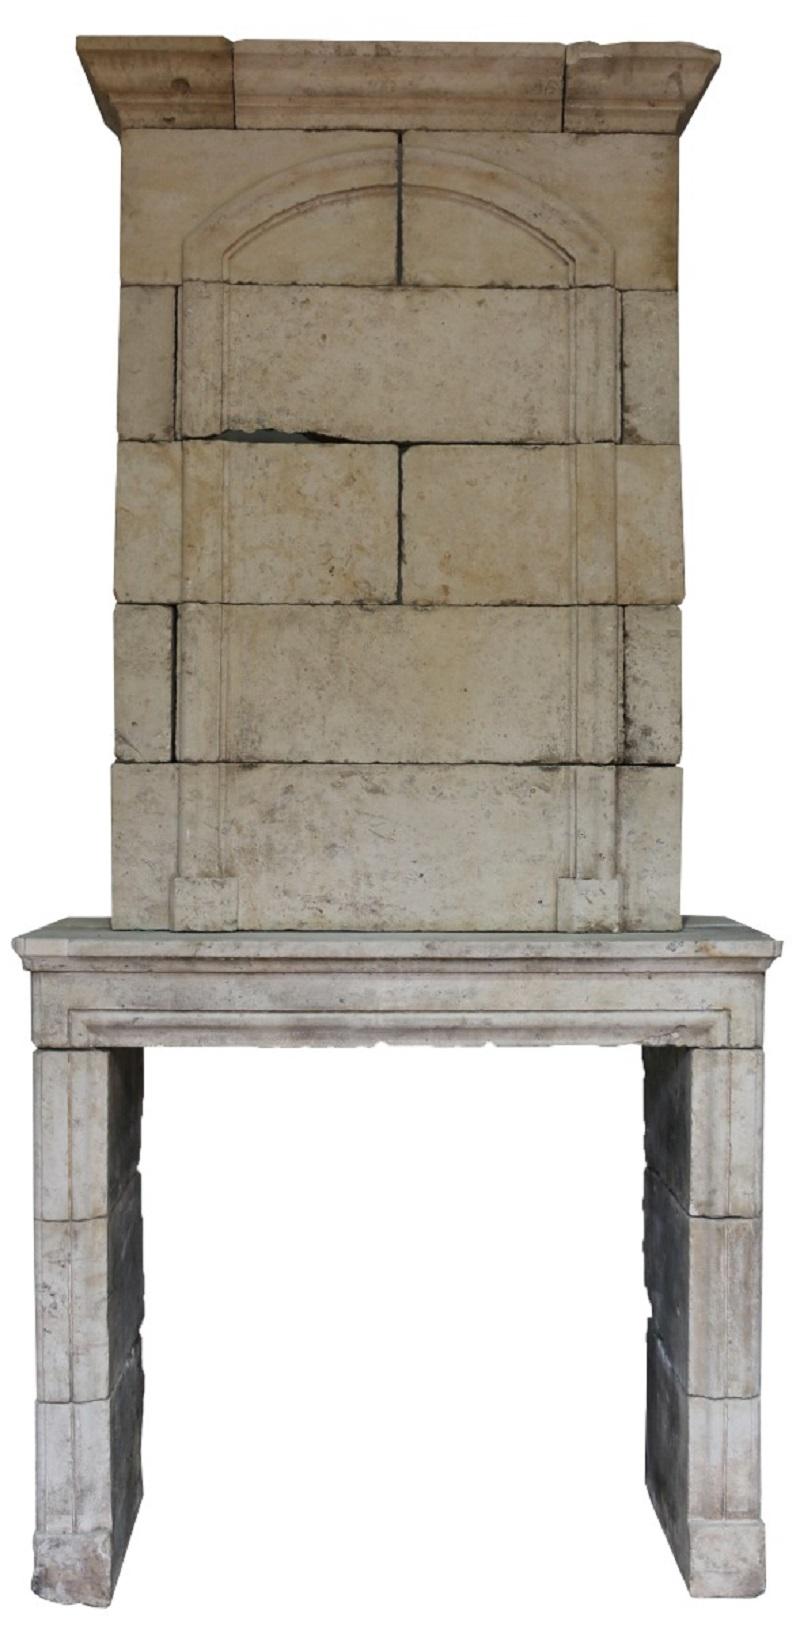 An impressive 18th century Limestone chimney or mantelpiece dating to the early 1700s. All parts are numbered and an accompanying plan will be supplied. The height and depth of the piece can be altered. This piece would have originally been built